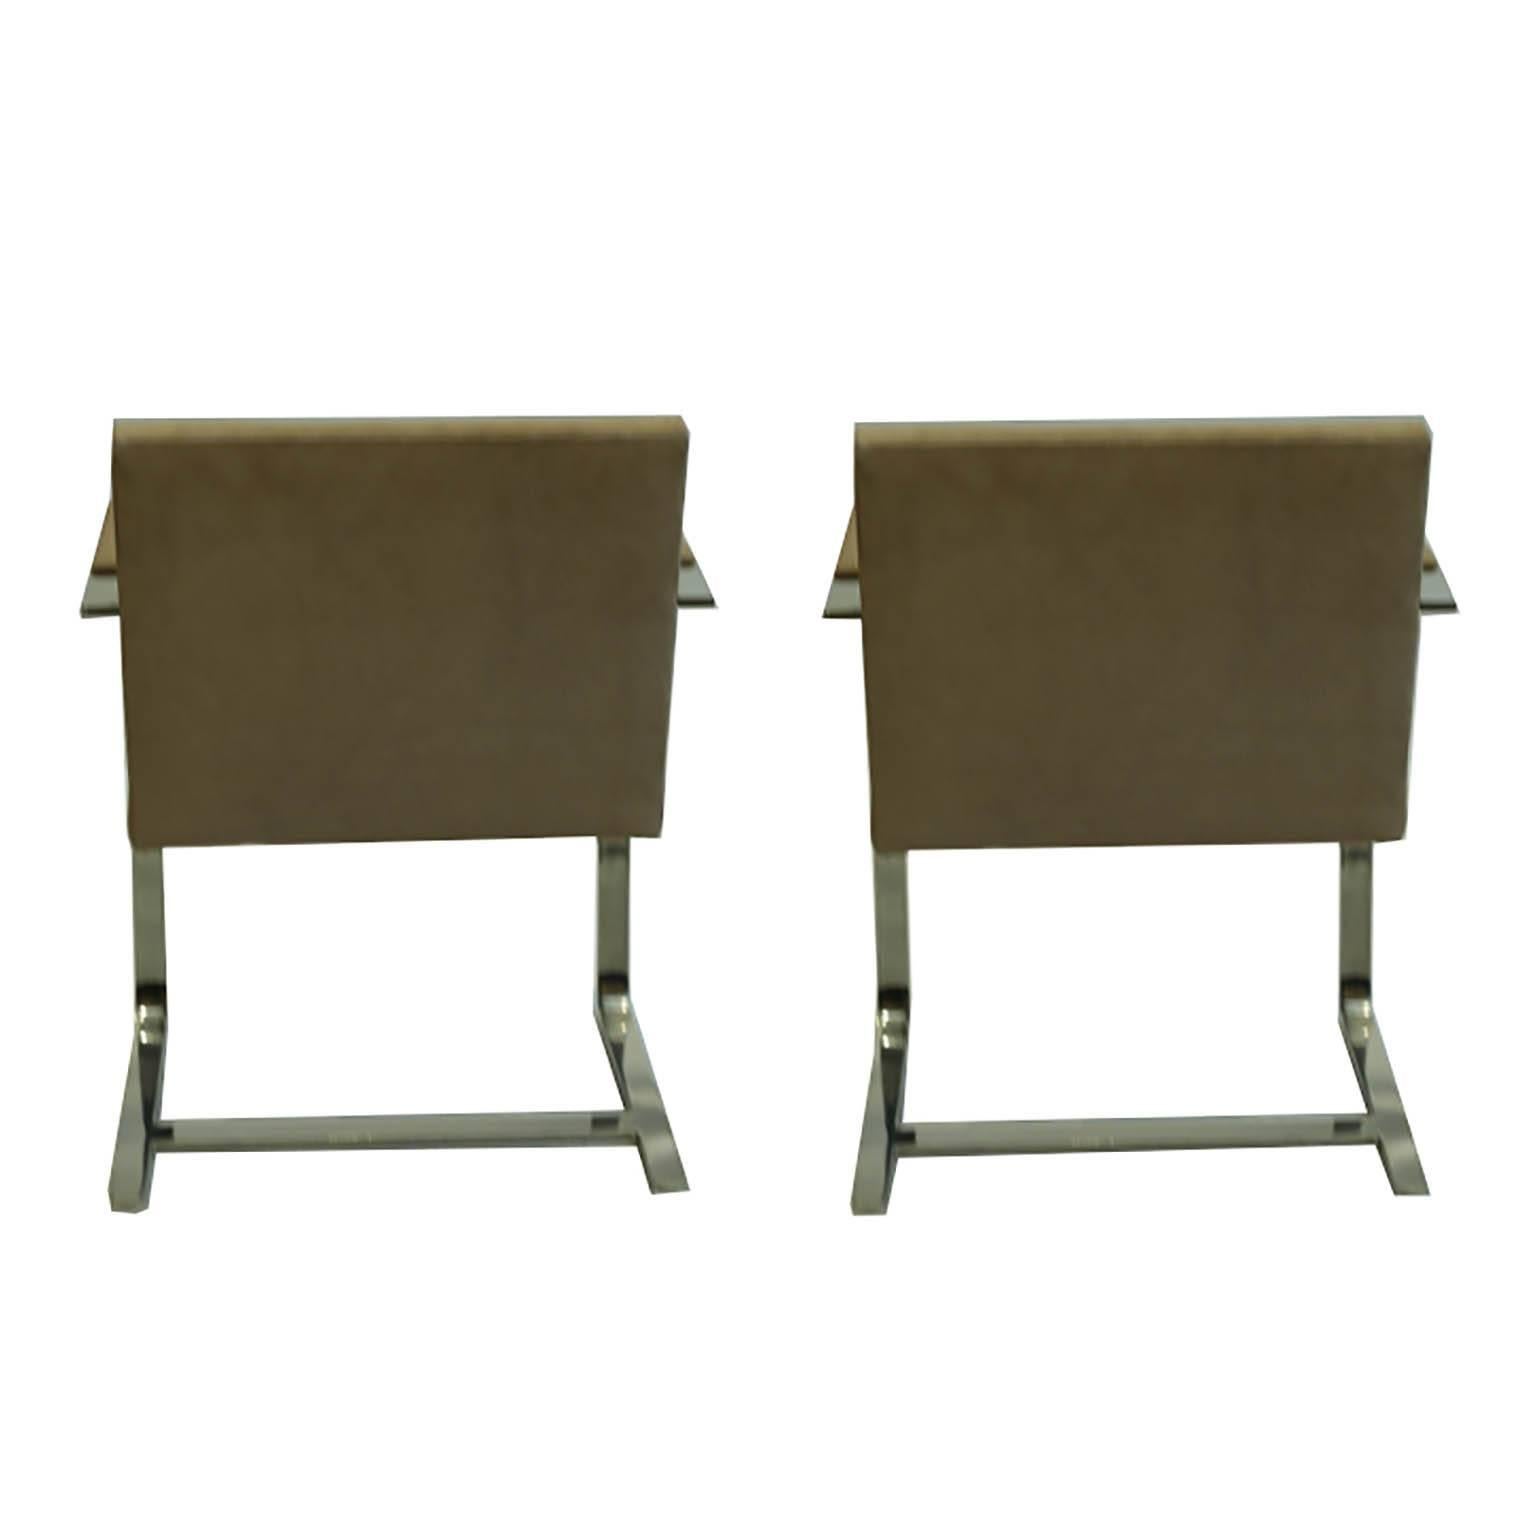 PRICE IS PER ITEM. MAY PURCHASE INDIVIDUALLY. 

Pair of flatbar chrome suede chairs by Mies van der Rohe for Knoll. 